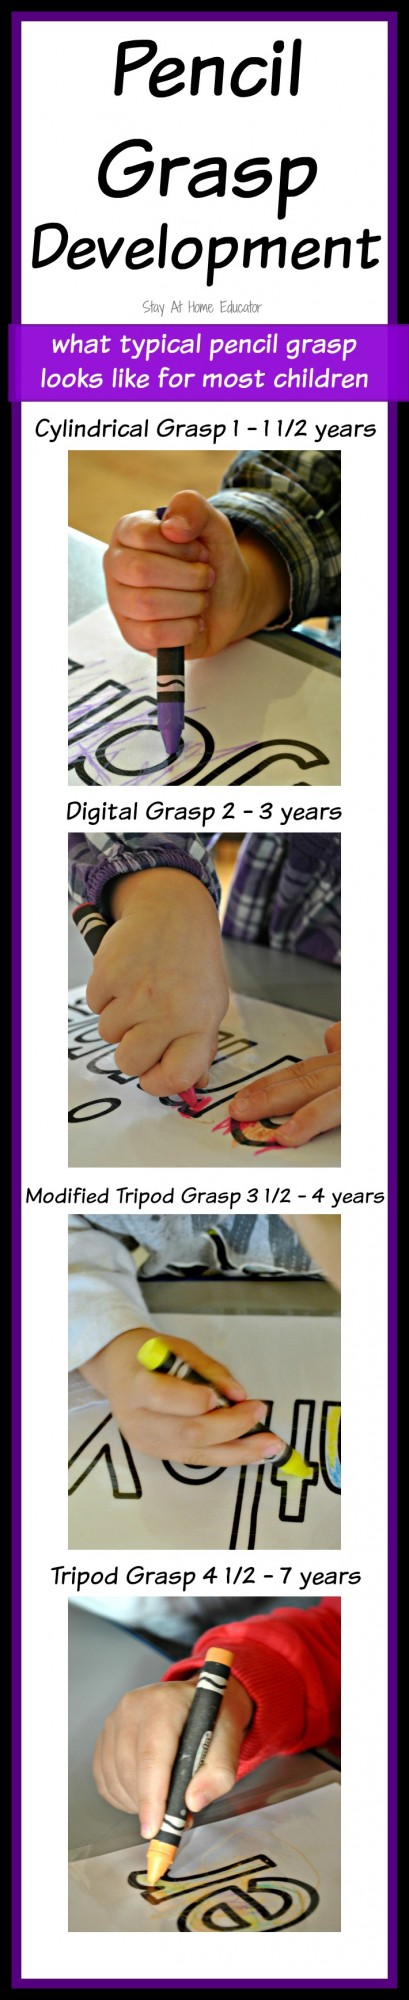 Pencil Grasp Development - what typical pencil grasp looks like for most children - Stay At Home Educator